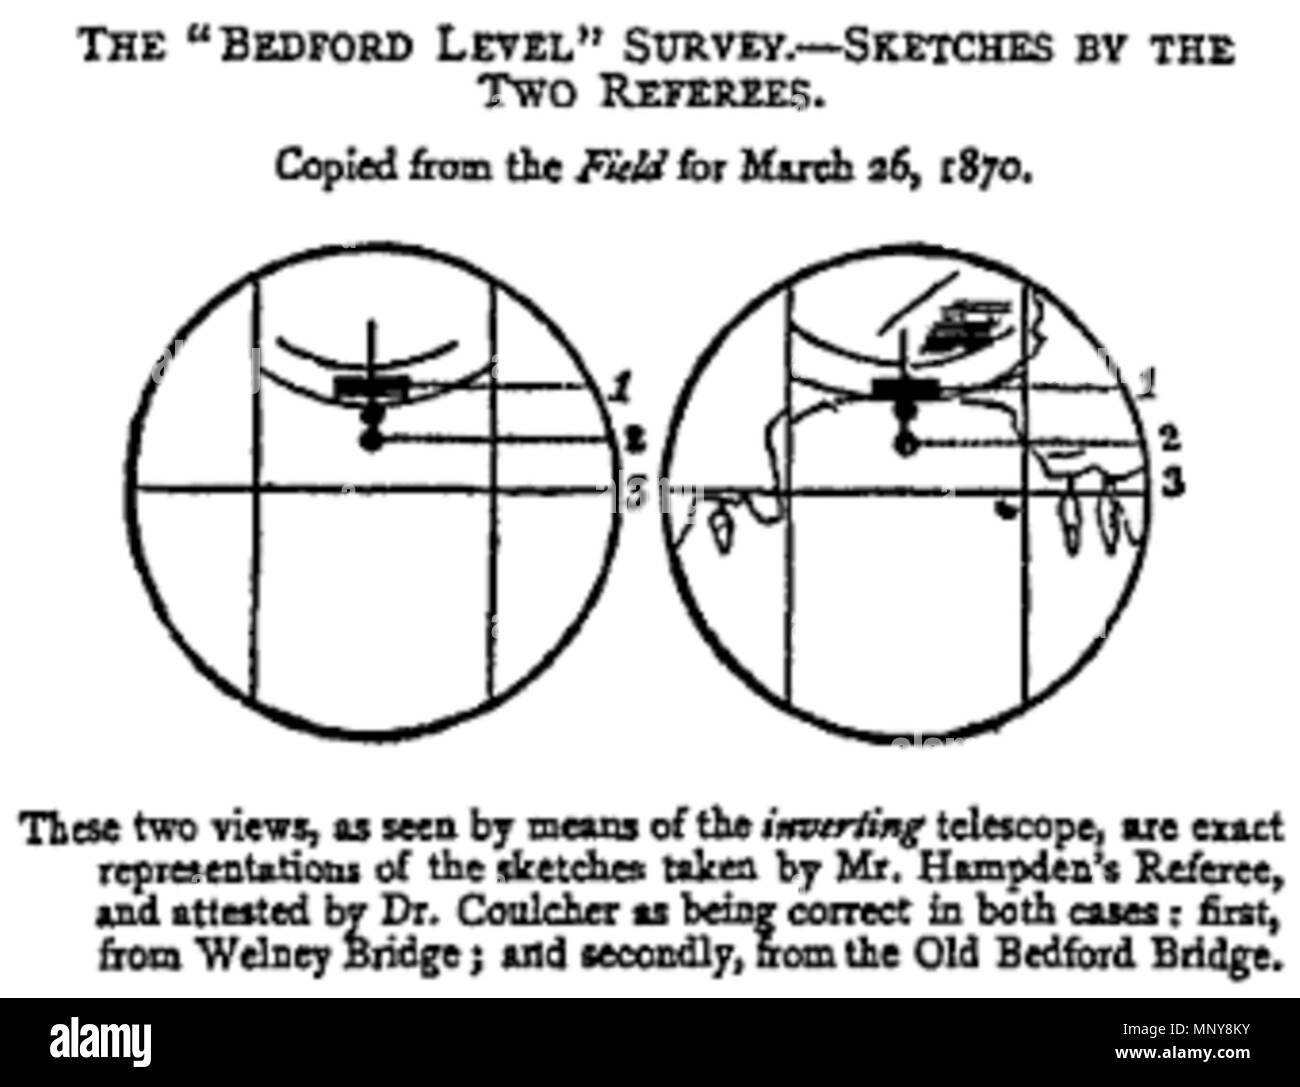 English The View Through The Level Used By Alfred Russel Wallace In The Bedford Level Experiment A Wager Between Him And John Hampden To Demonstrate The Curvature Of The Earth This